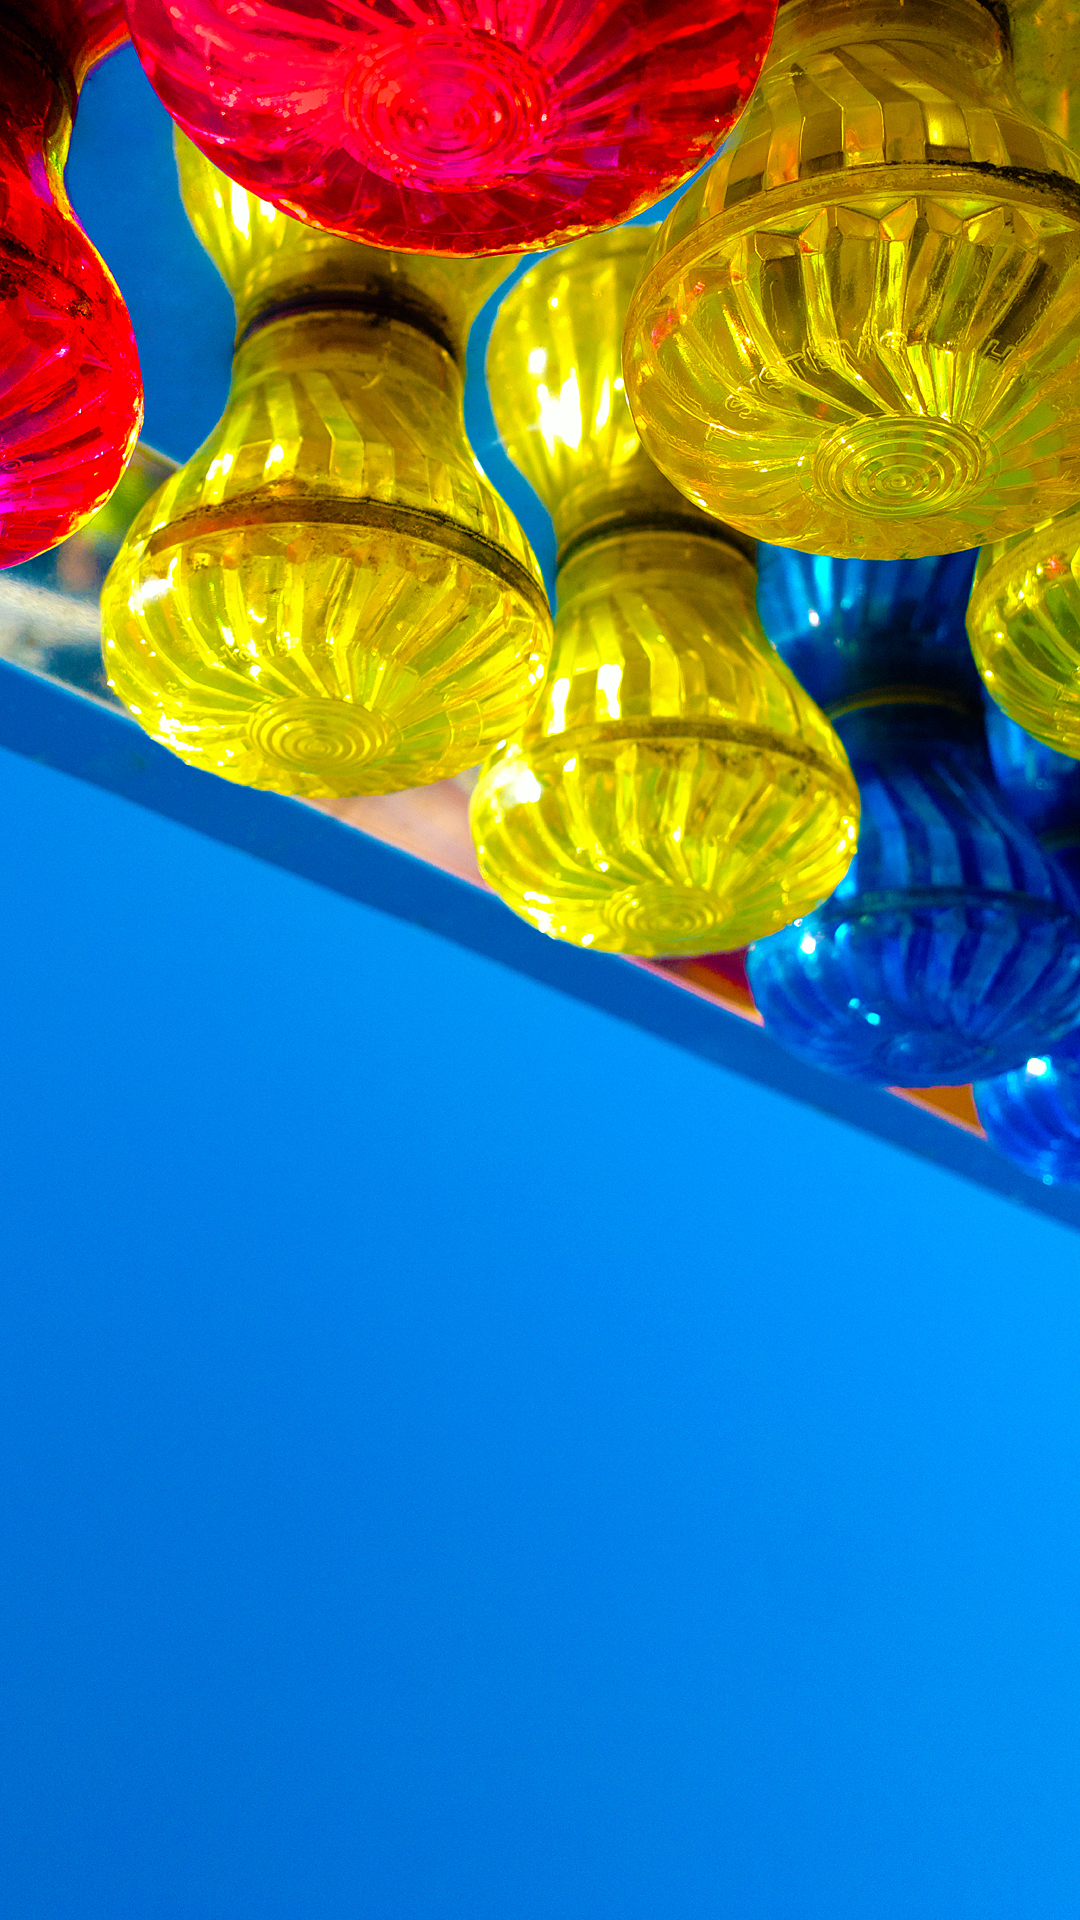 lumia wallpaper,blue,yellow,water,electric blue,colorfulness